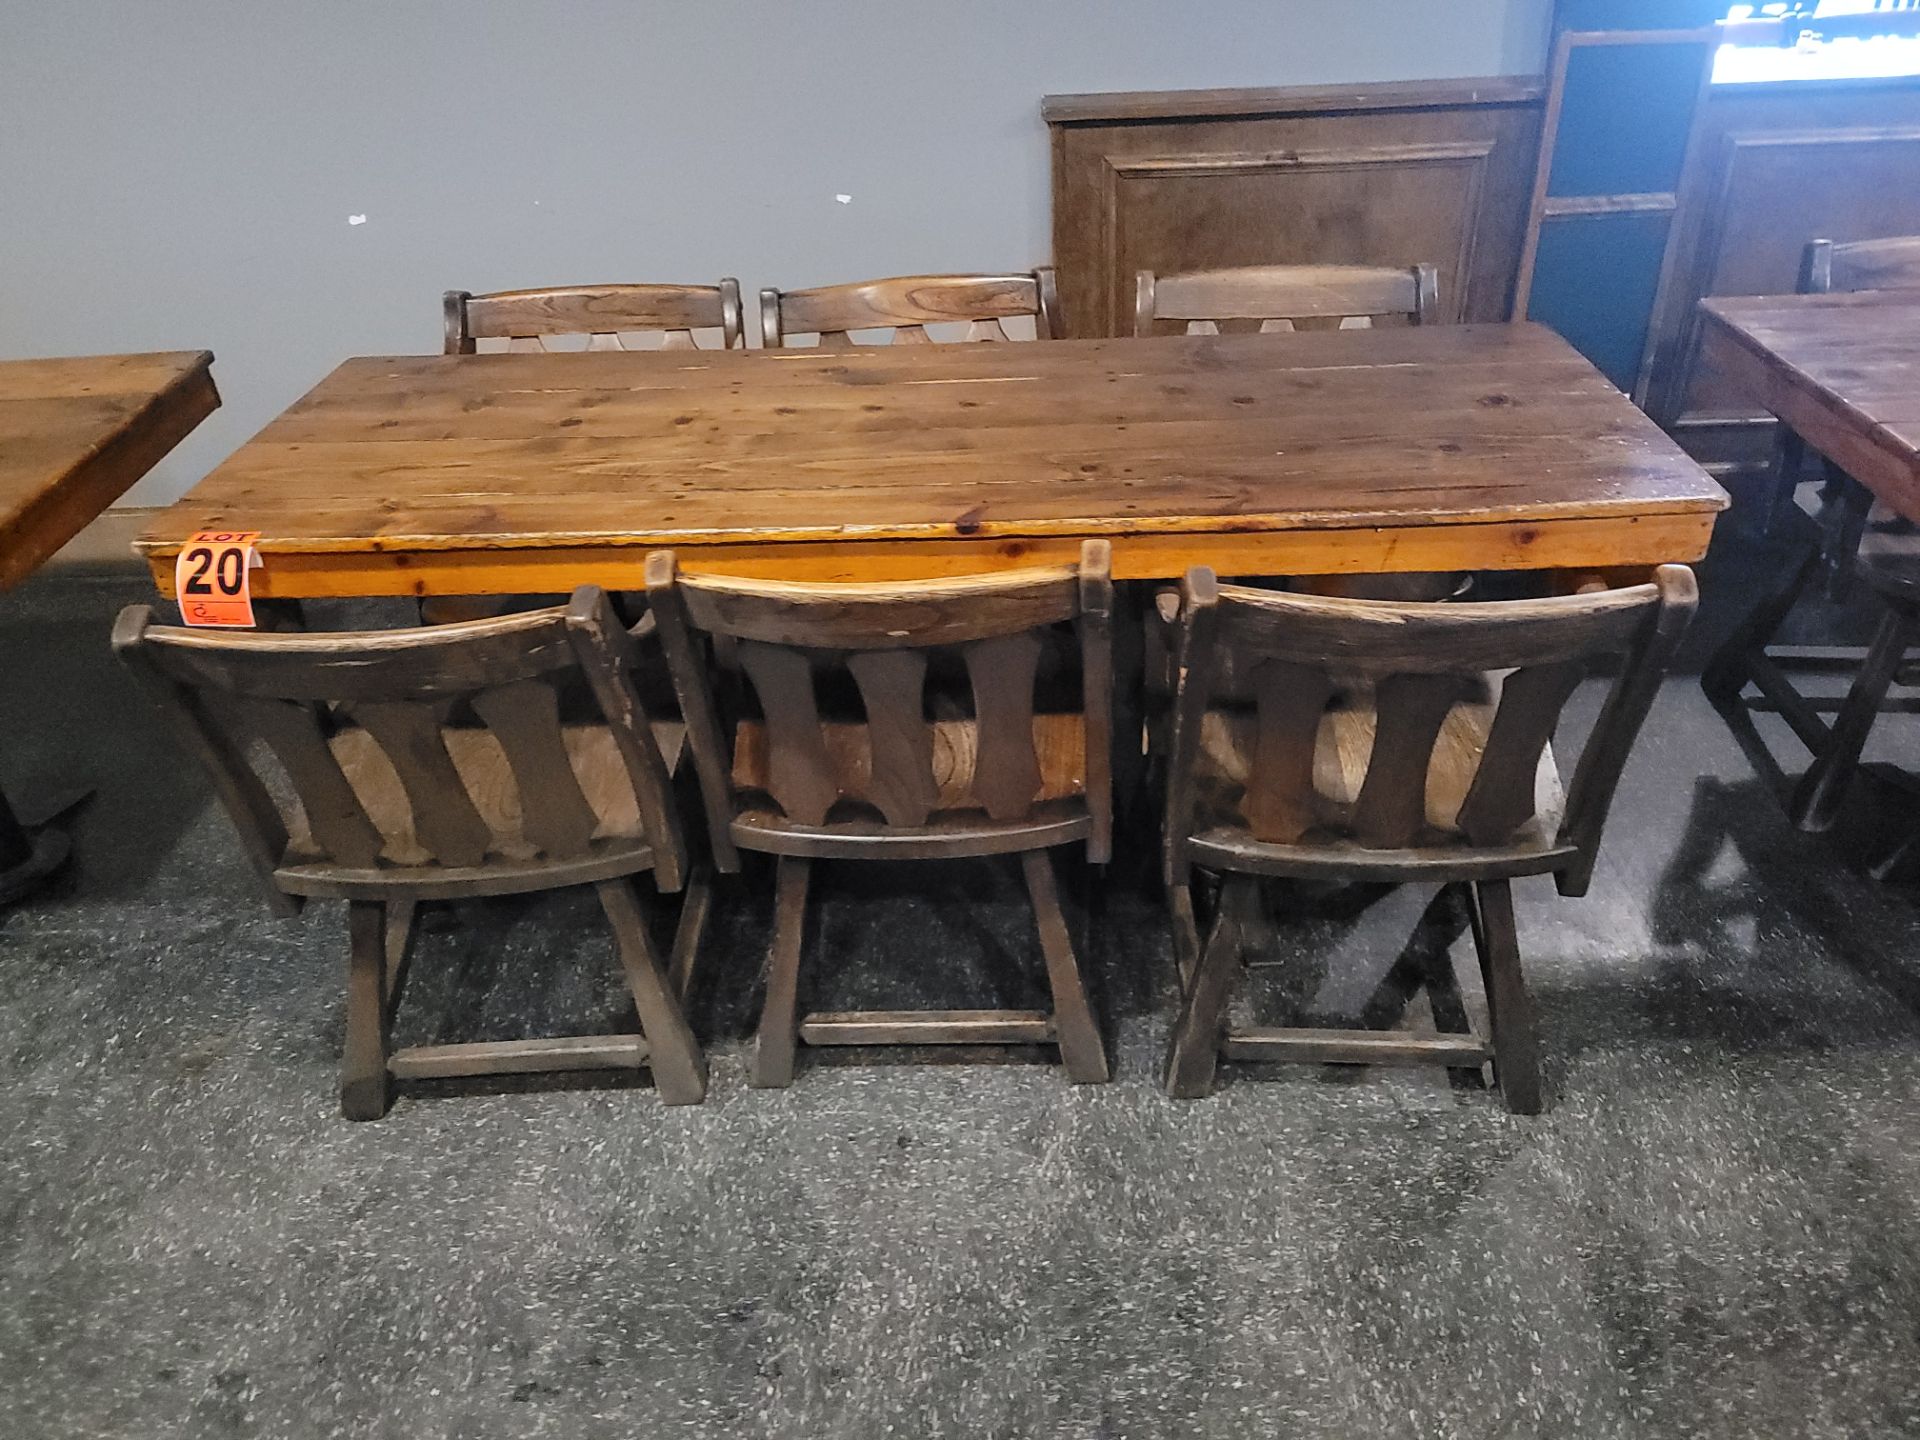 6-Seat varnished hardwood dining table and (6) pub-style wooden chairs